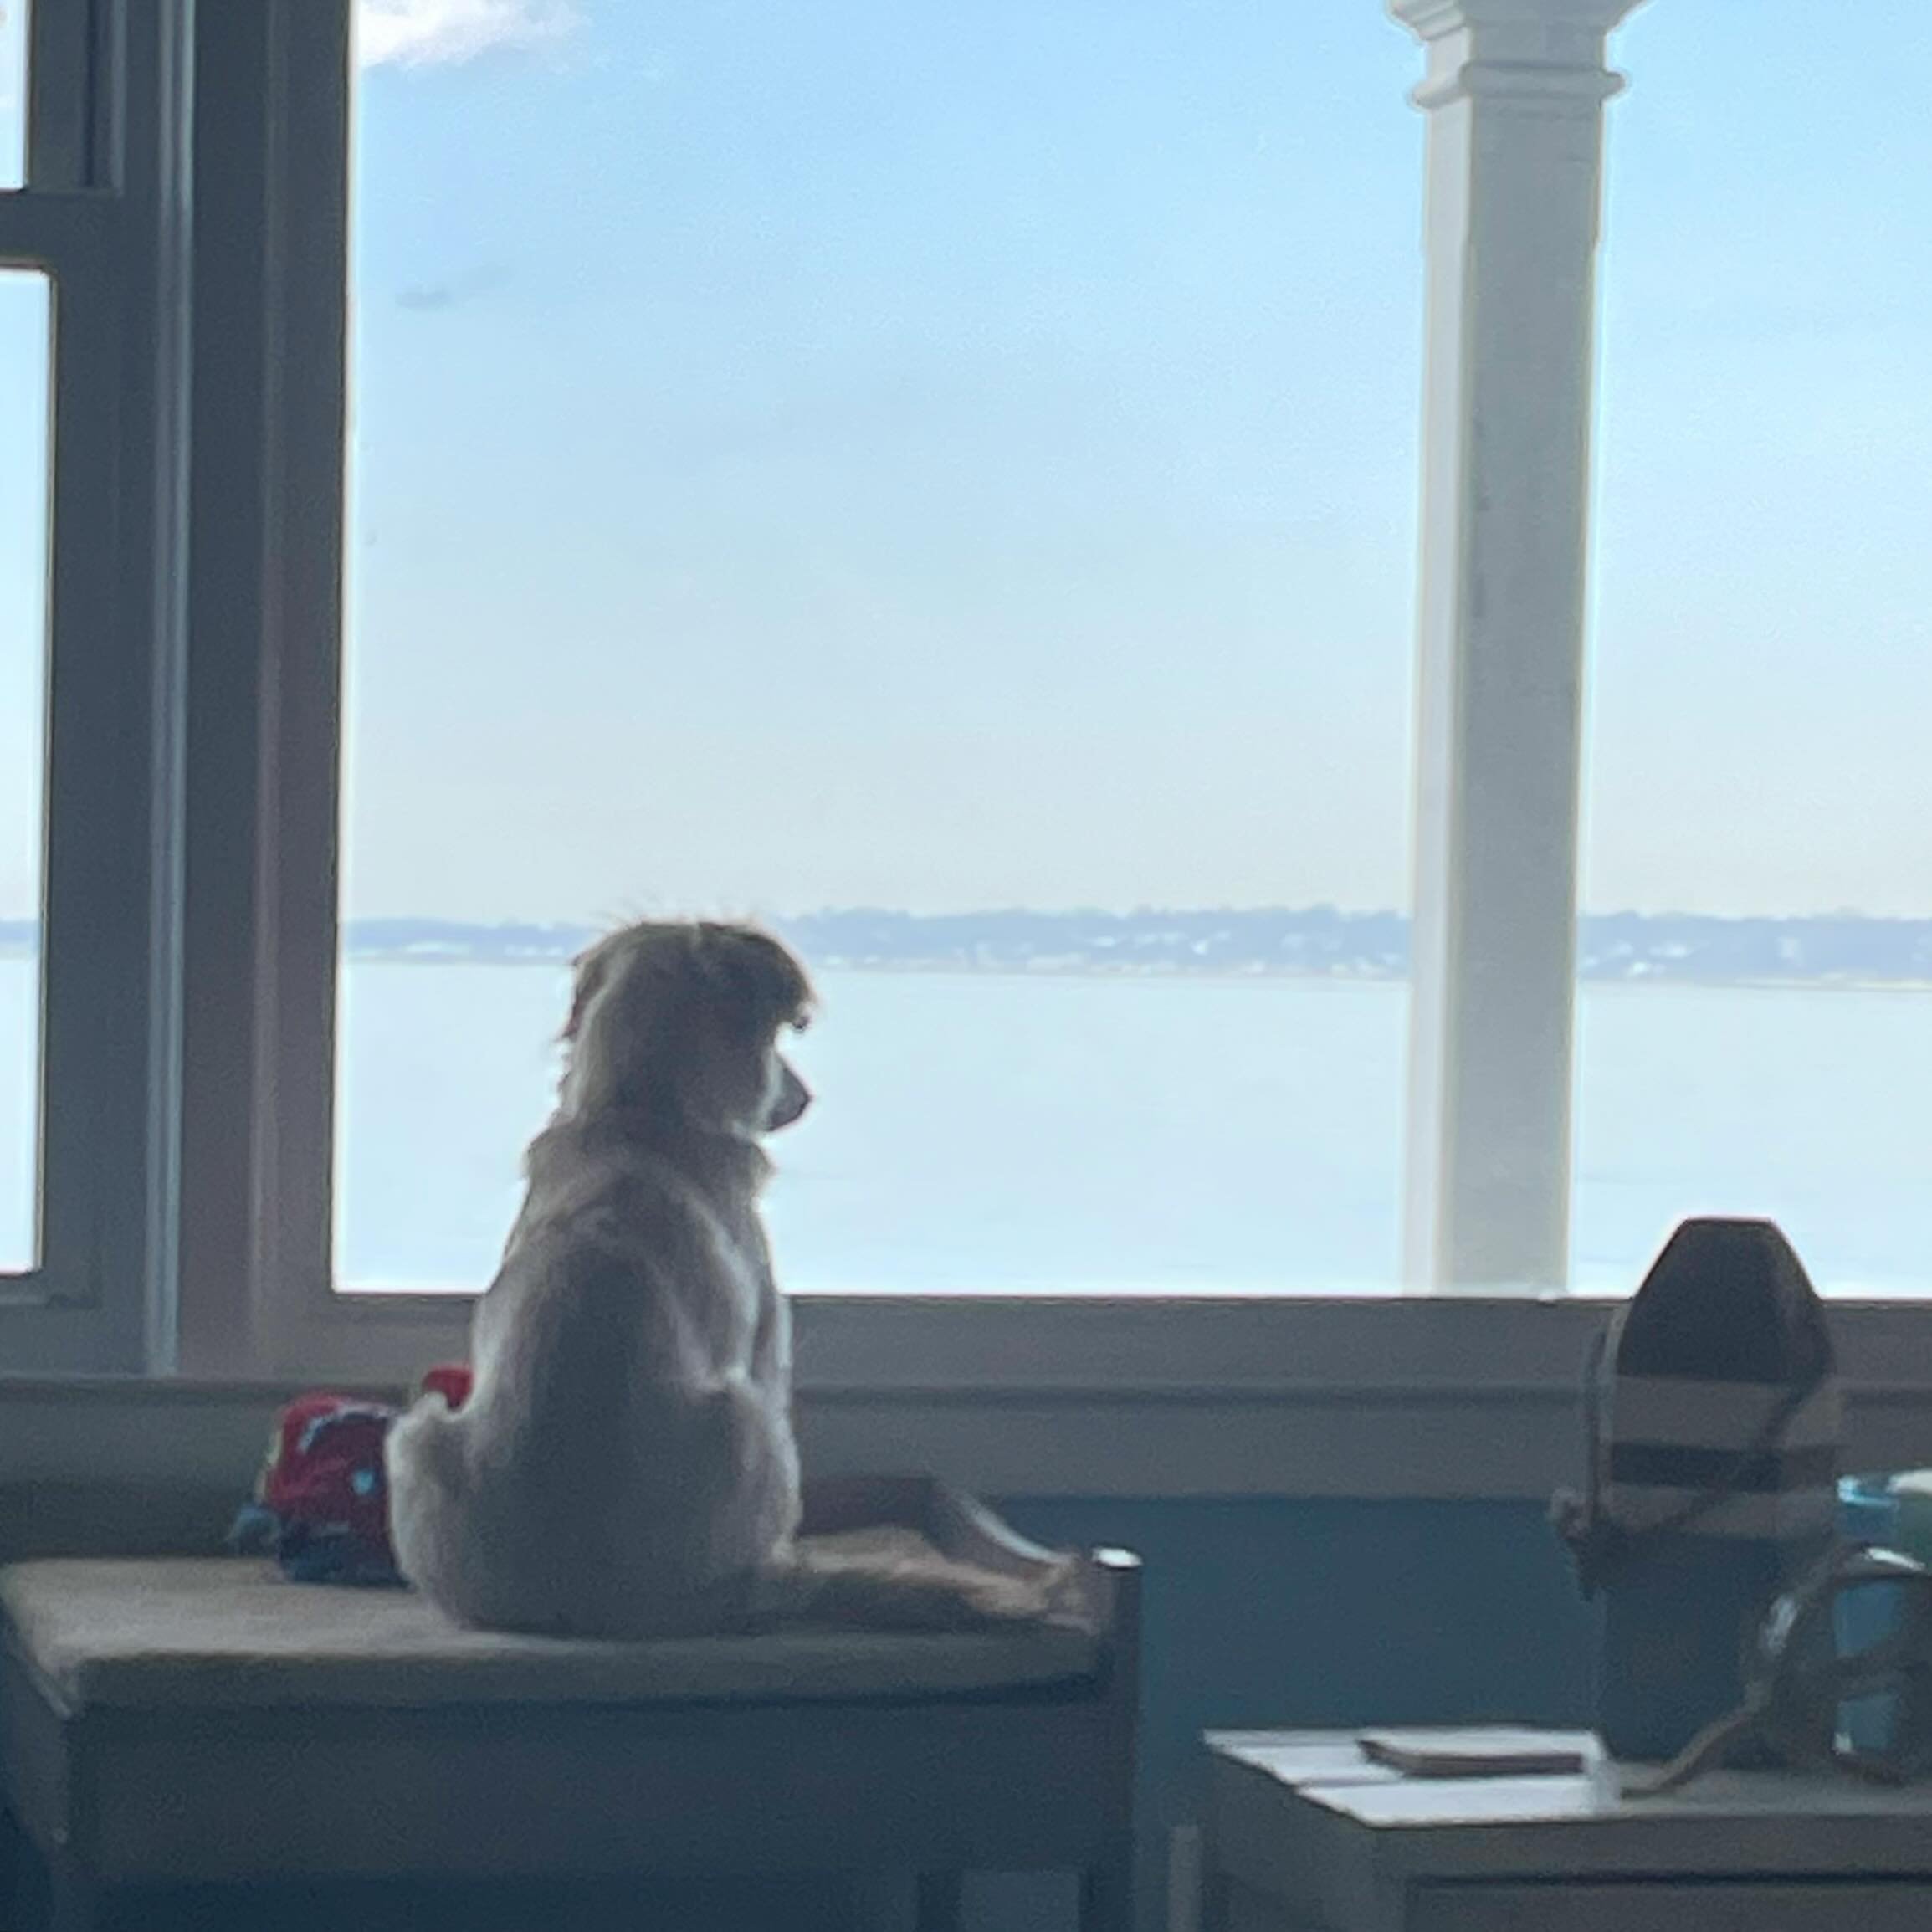 Your Daily Pancake:
Did we buy our little Pancake a small dog perch? Yes, yes we did. Complete with stairs and room for toys. Did we rearrange our livingroom again?Yes, yes we did. The front window is really the best place to look at the ocean, and t